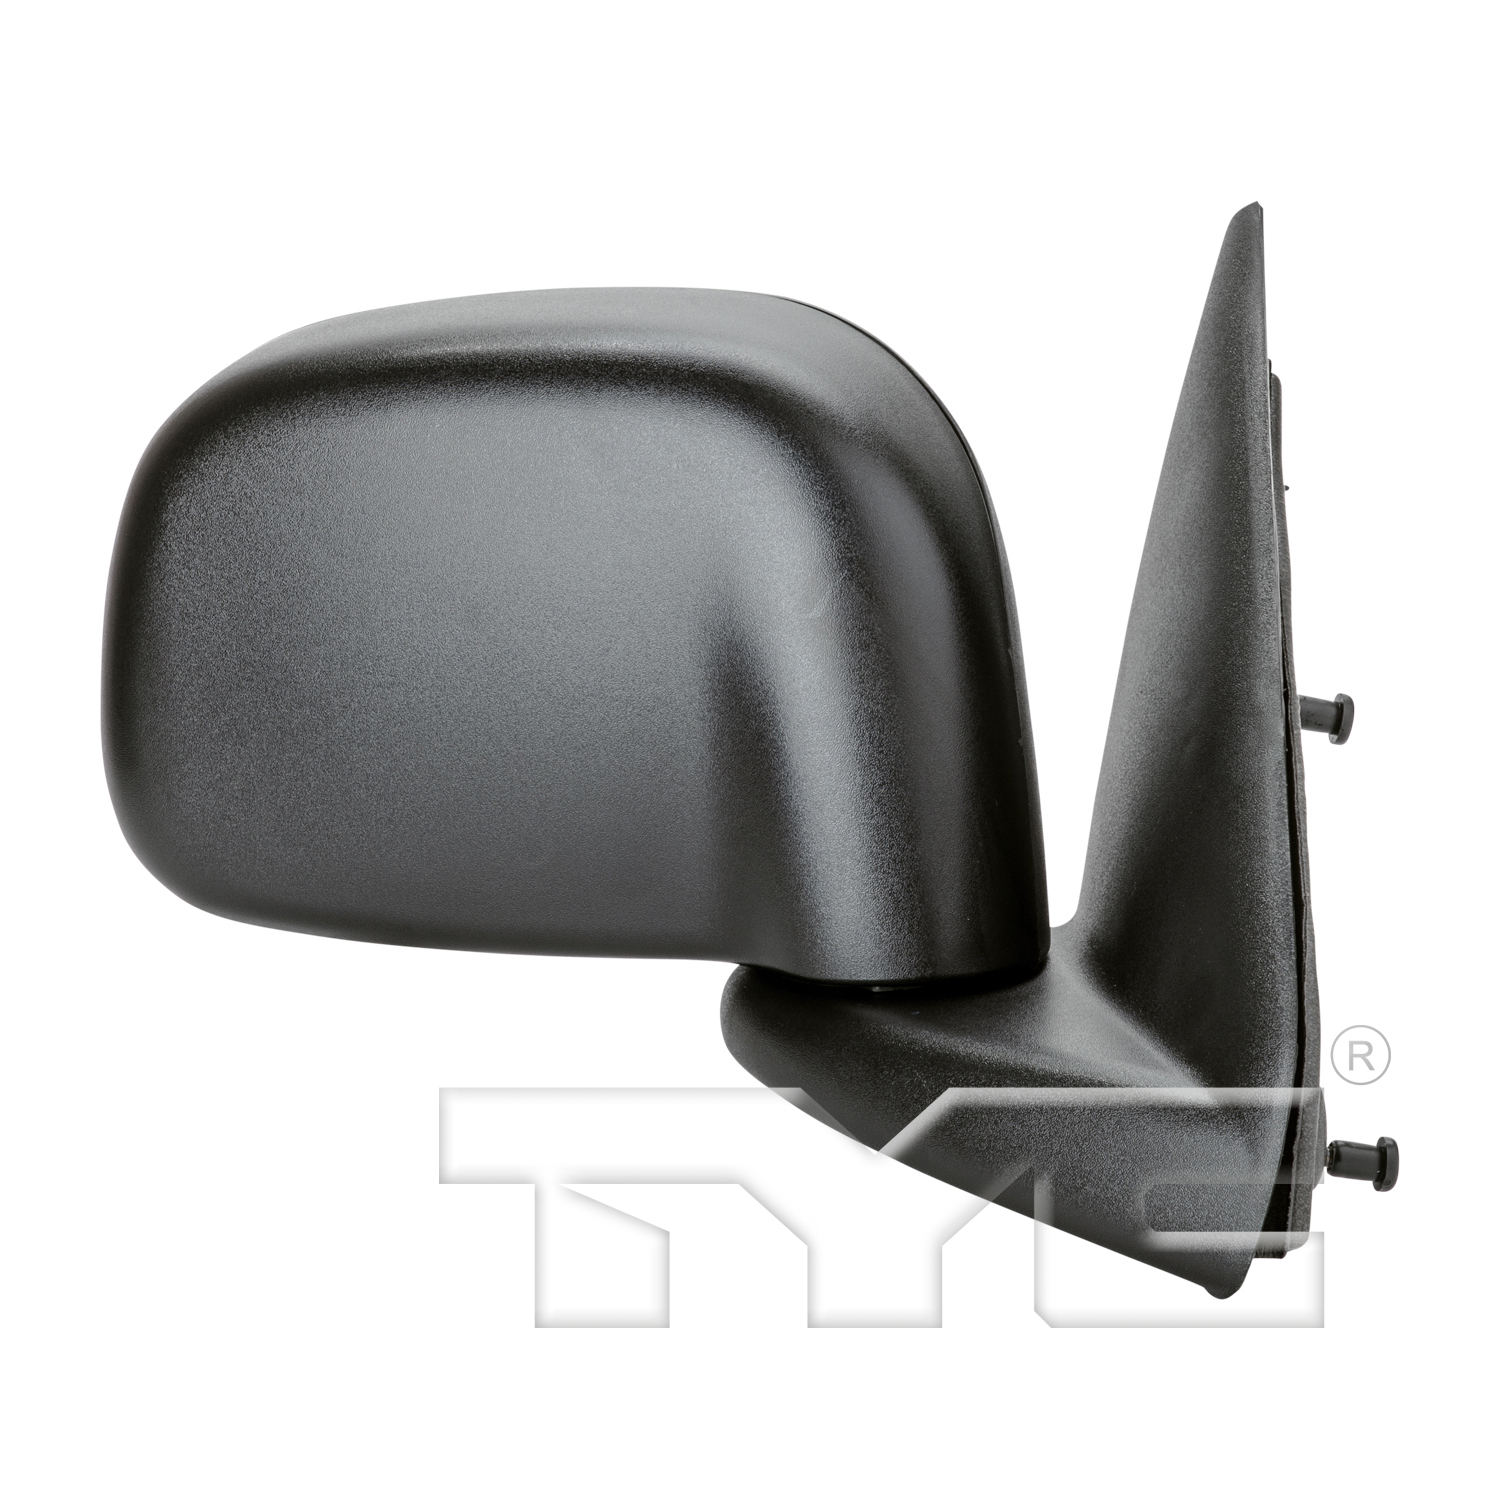 Aftermarket MIRRORS for DODGE - RAM 1500, RAM 1500,05-09,RT Mirror outside rear view